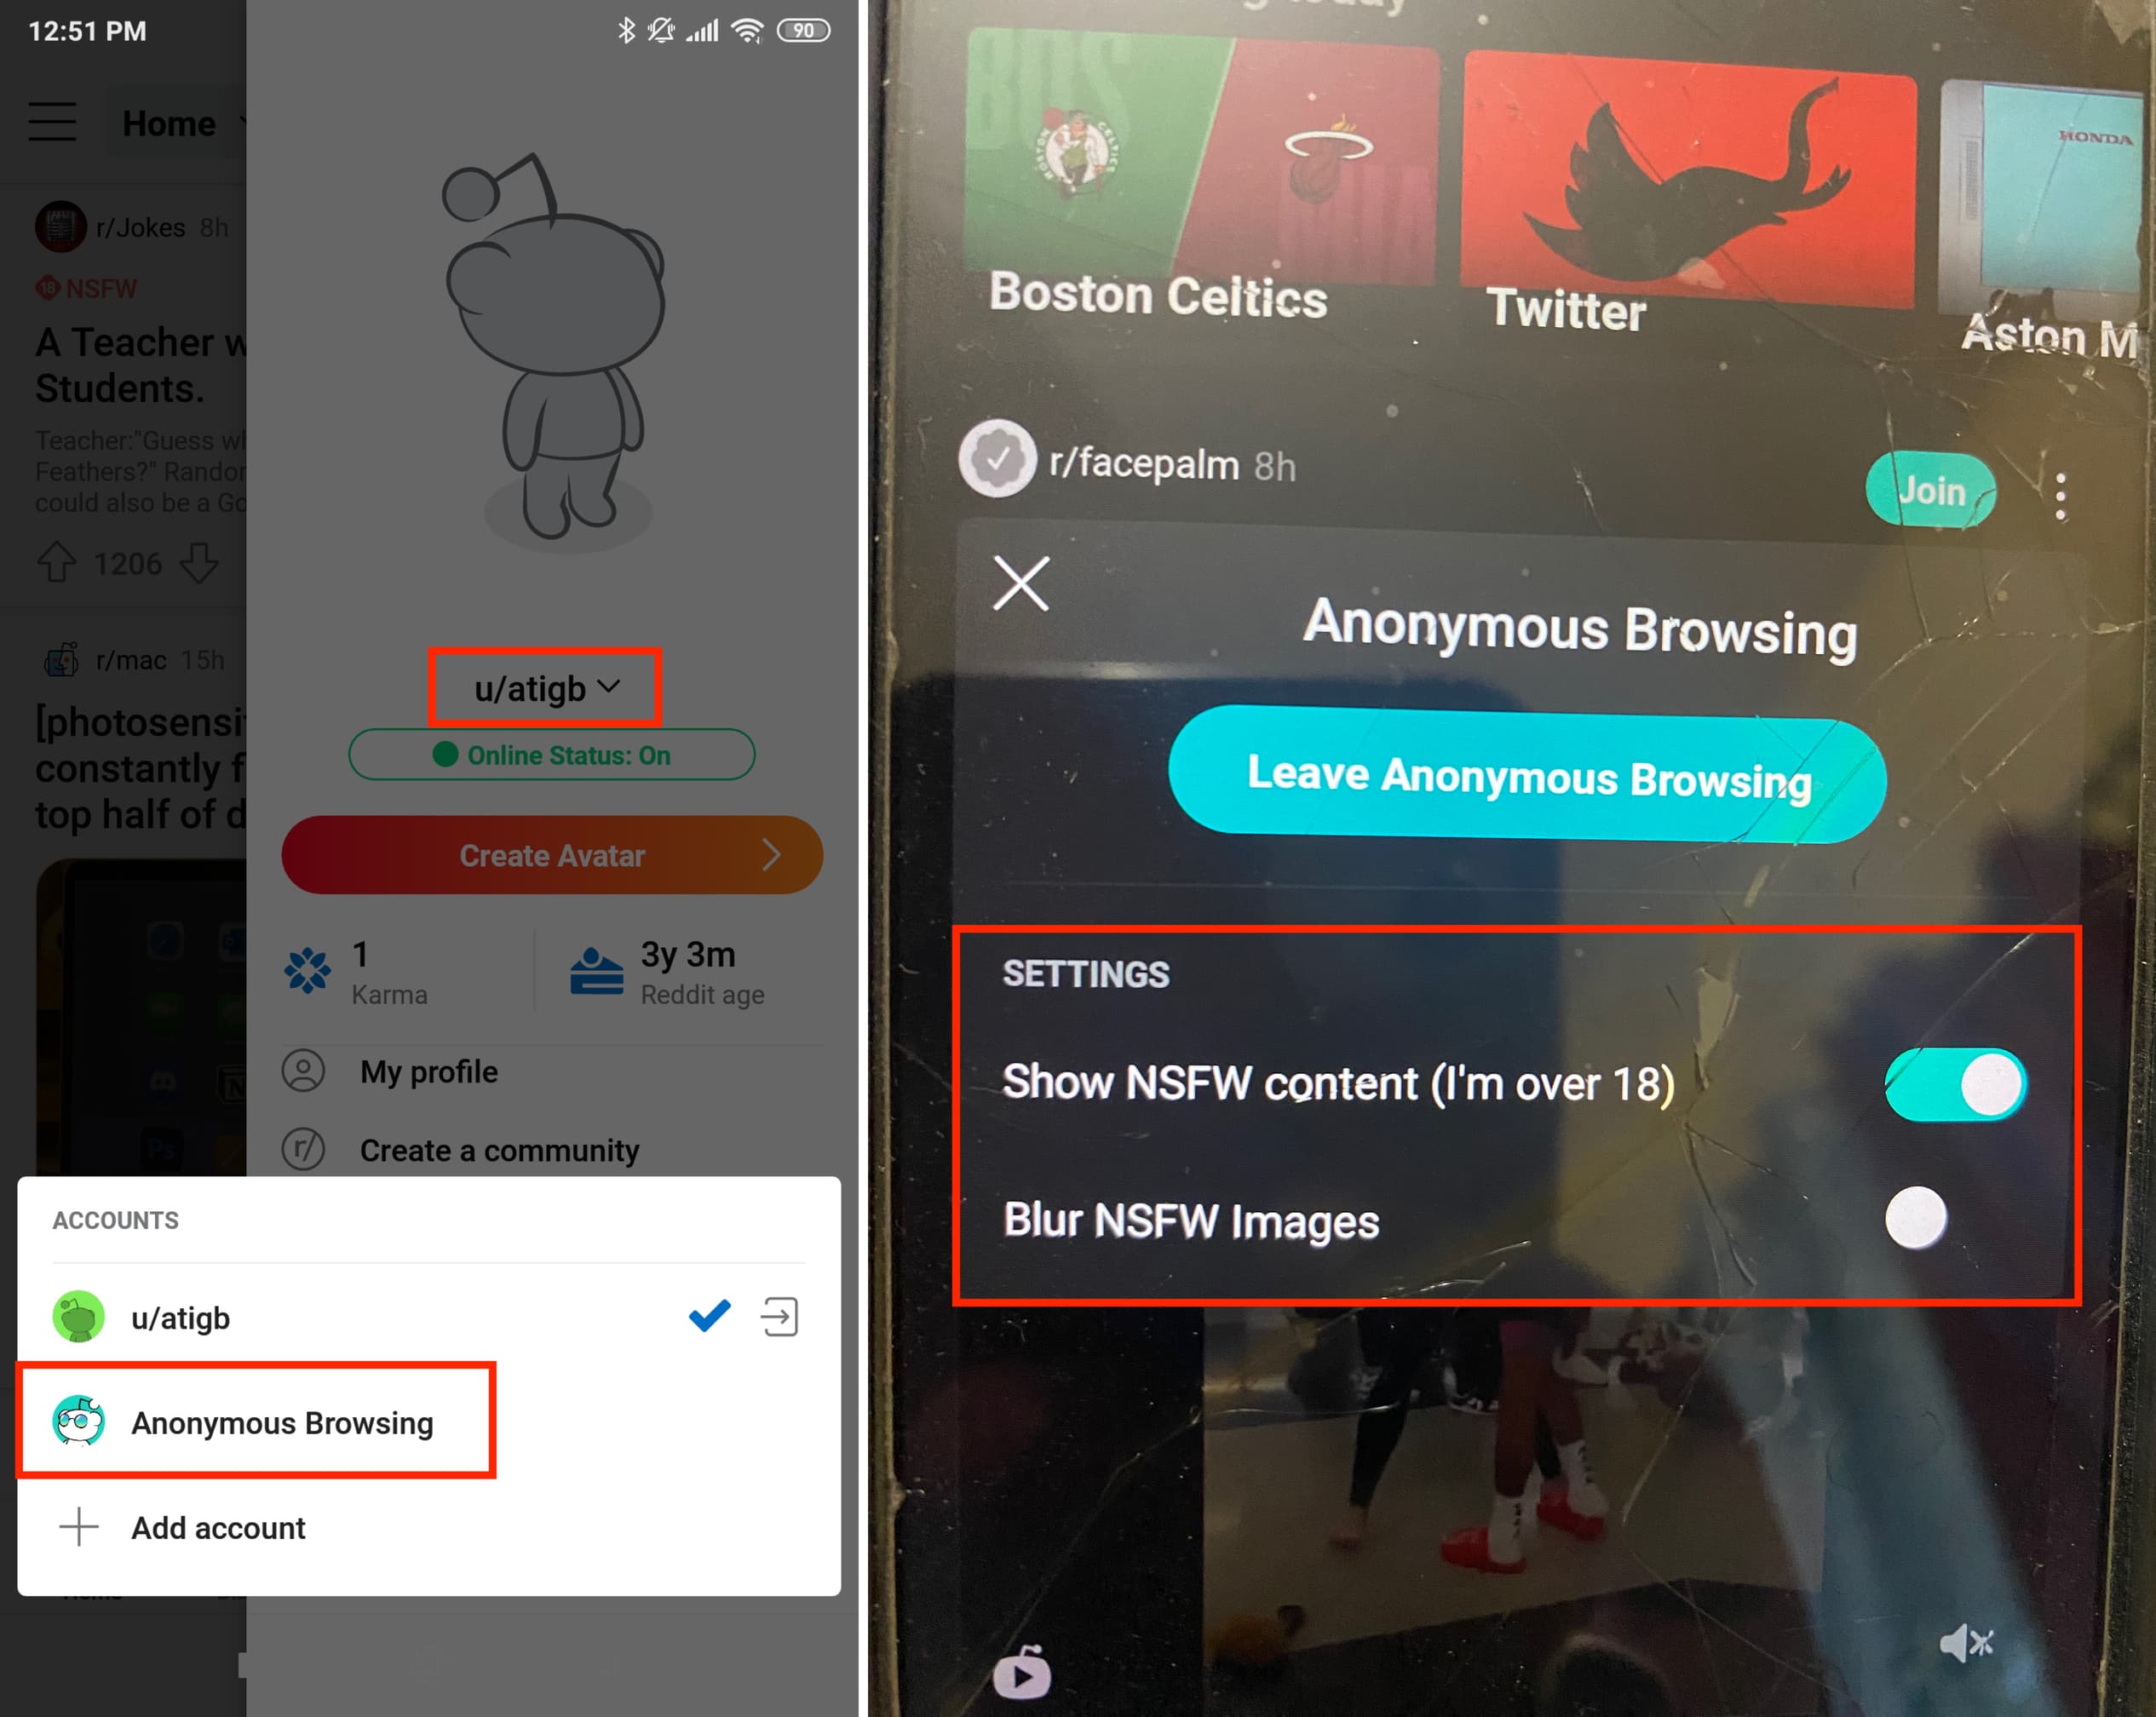 Show NSFW content and unblurred images during Anonymous Browsing in Reddit on Android